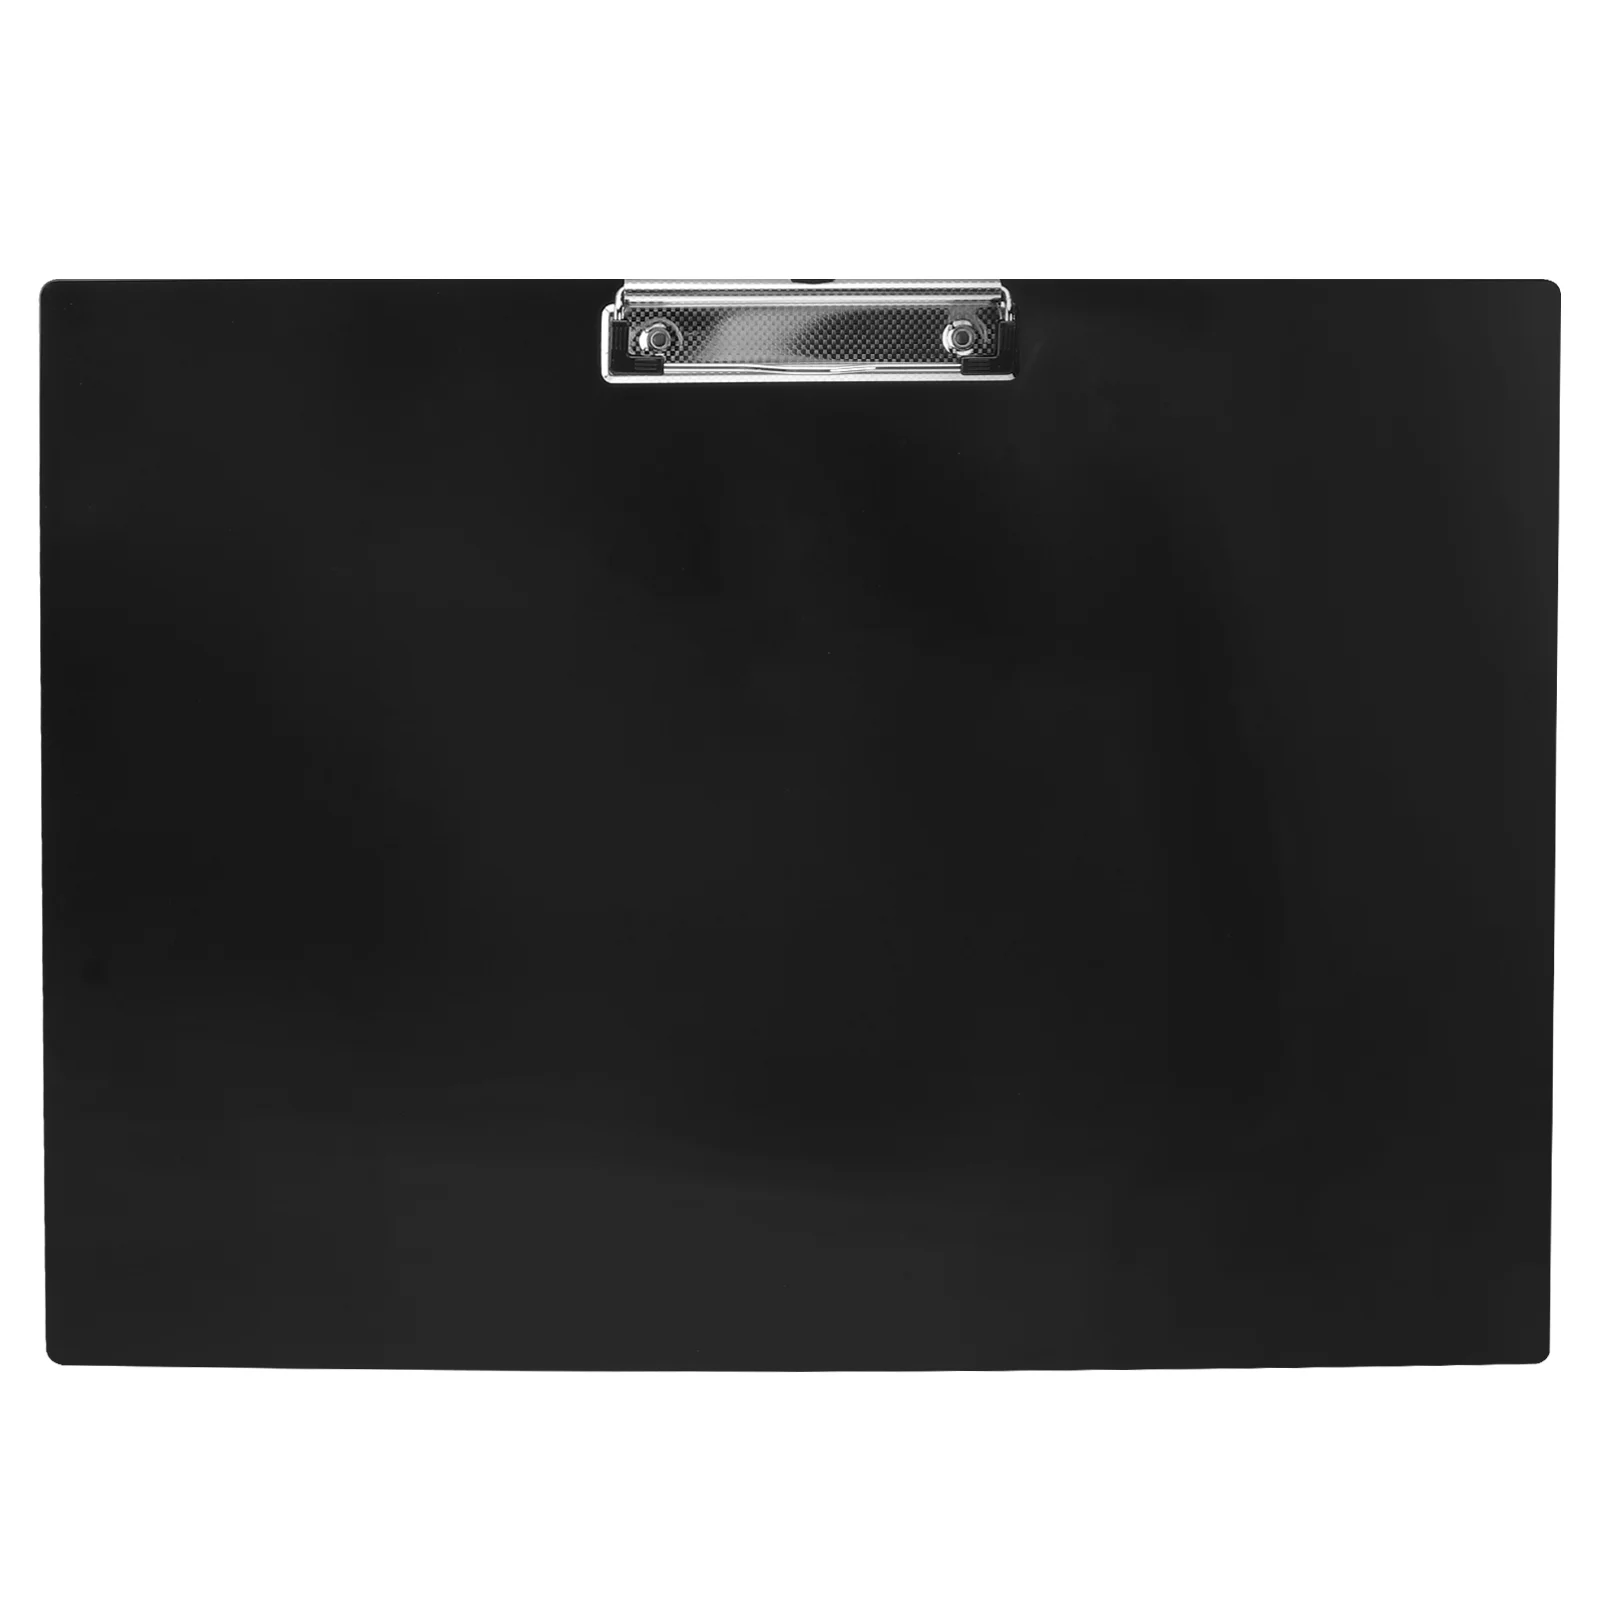 

Storage Black Folders A3 File Organizer Horizontal Writing Pad Board Painting Holder for Office School Home ( Black )